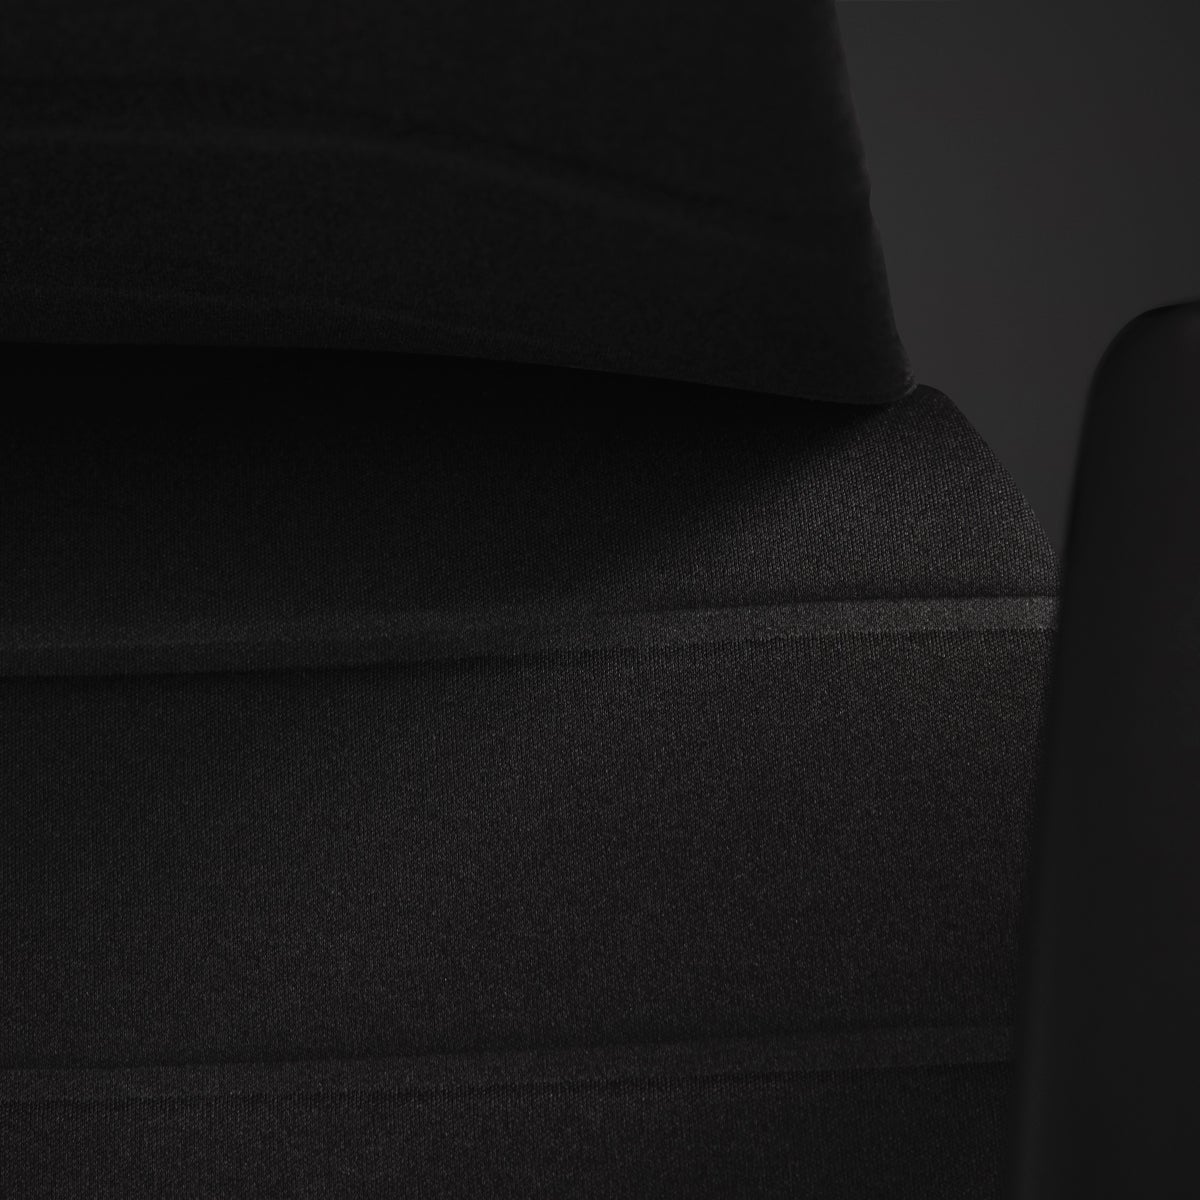 An Embody Gaming Chair close-up on the seat’s layered technology with a black background.